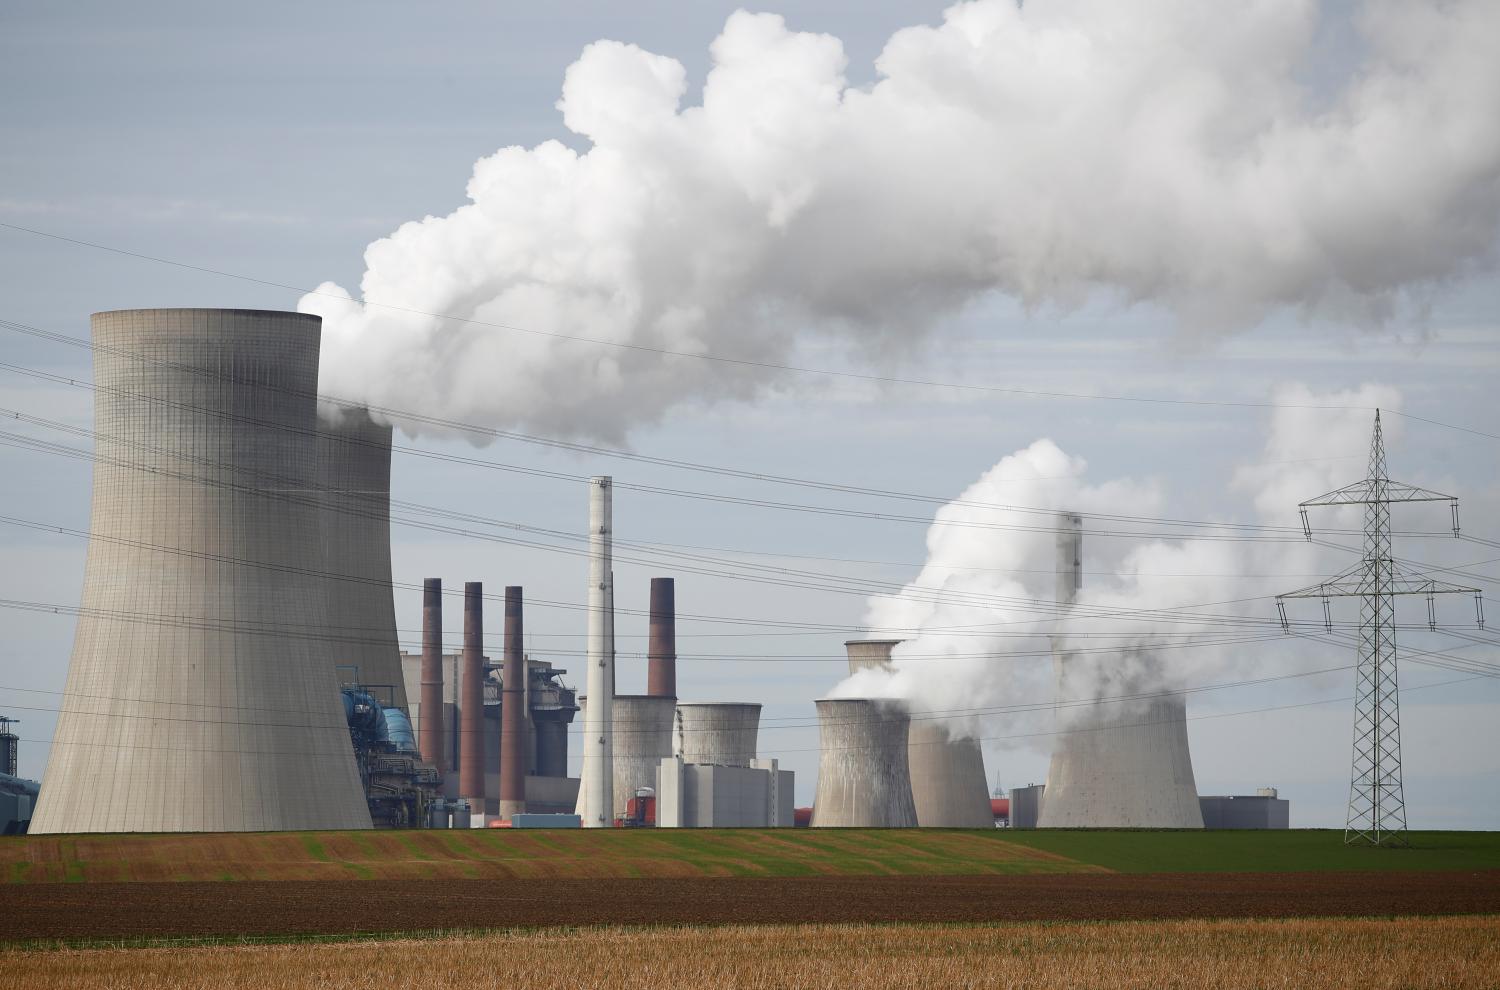 Steam rises from the five brown coal-fired power units of RWE, one of Europe's biggest electricity companies in Neurath, north-west of Cologne, Germany March 12, 2019. REUTERS/Wolfgang Rattay - RC1E5D3C6B40